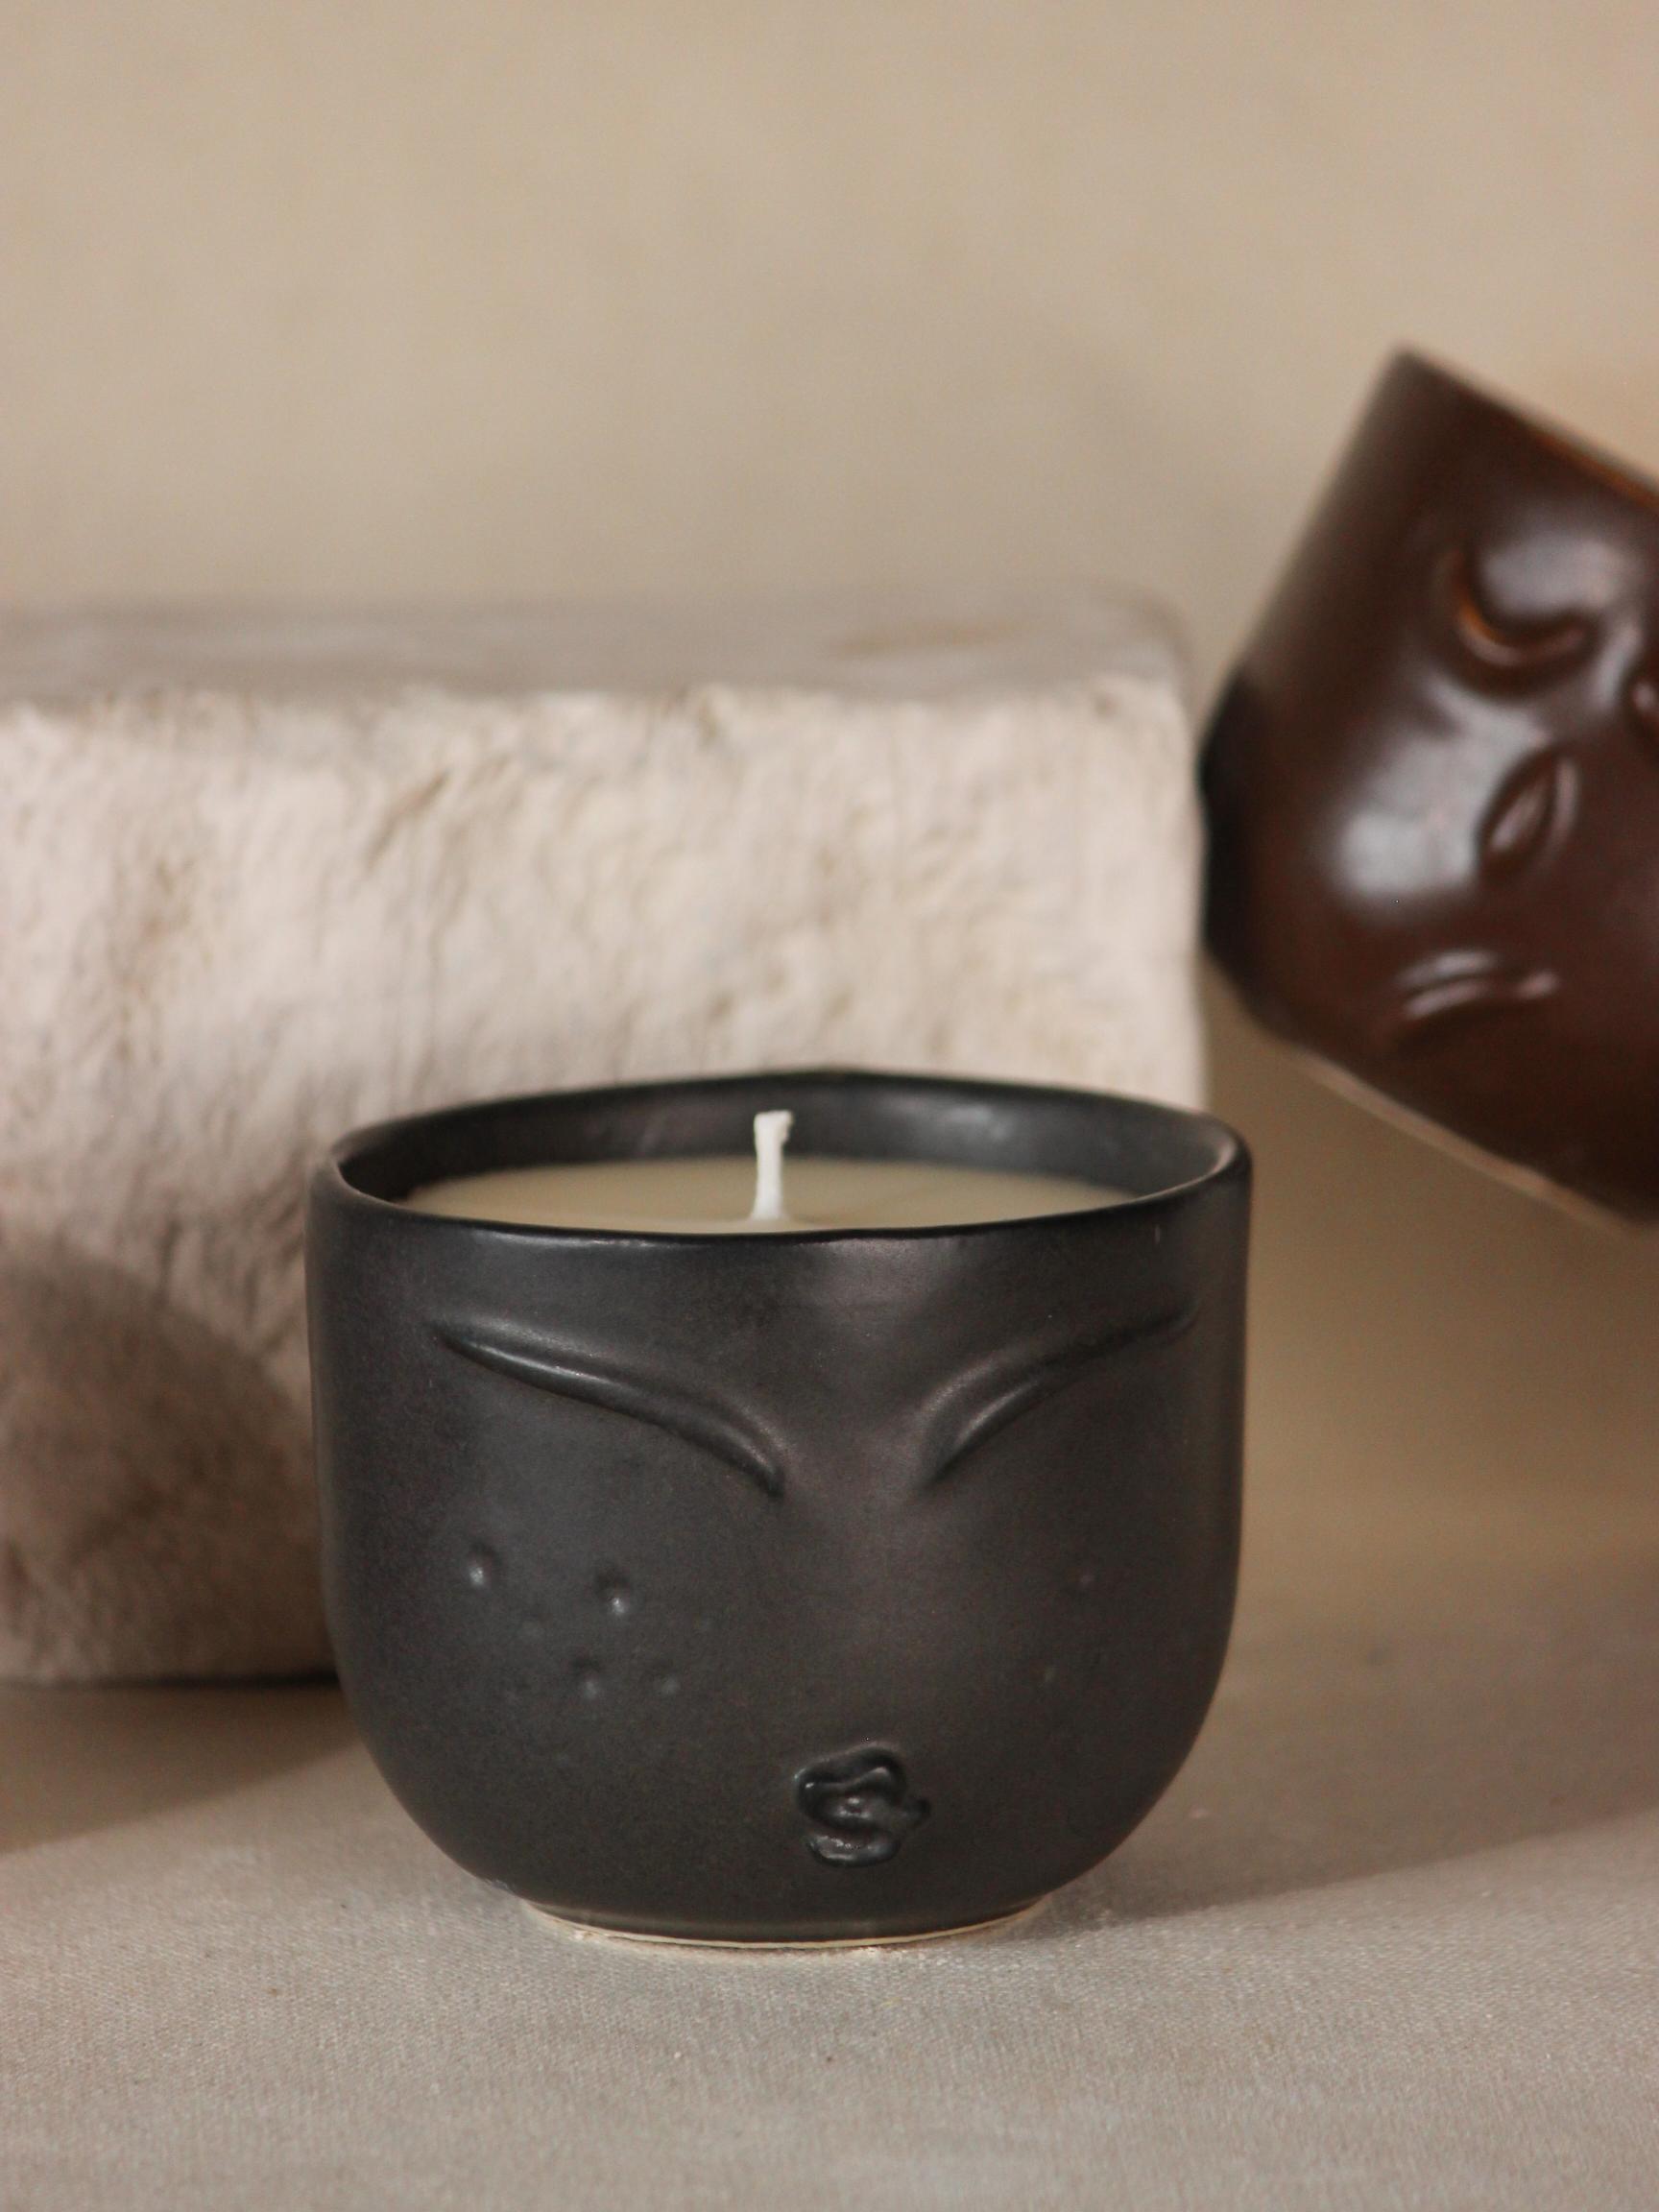 The Orby House The Sage Face Ceramic Jar Candle: Hazelnut Coffee Delight